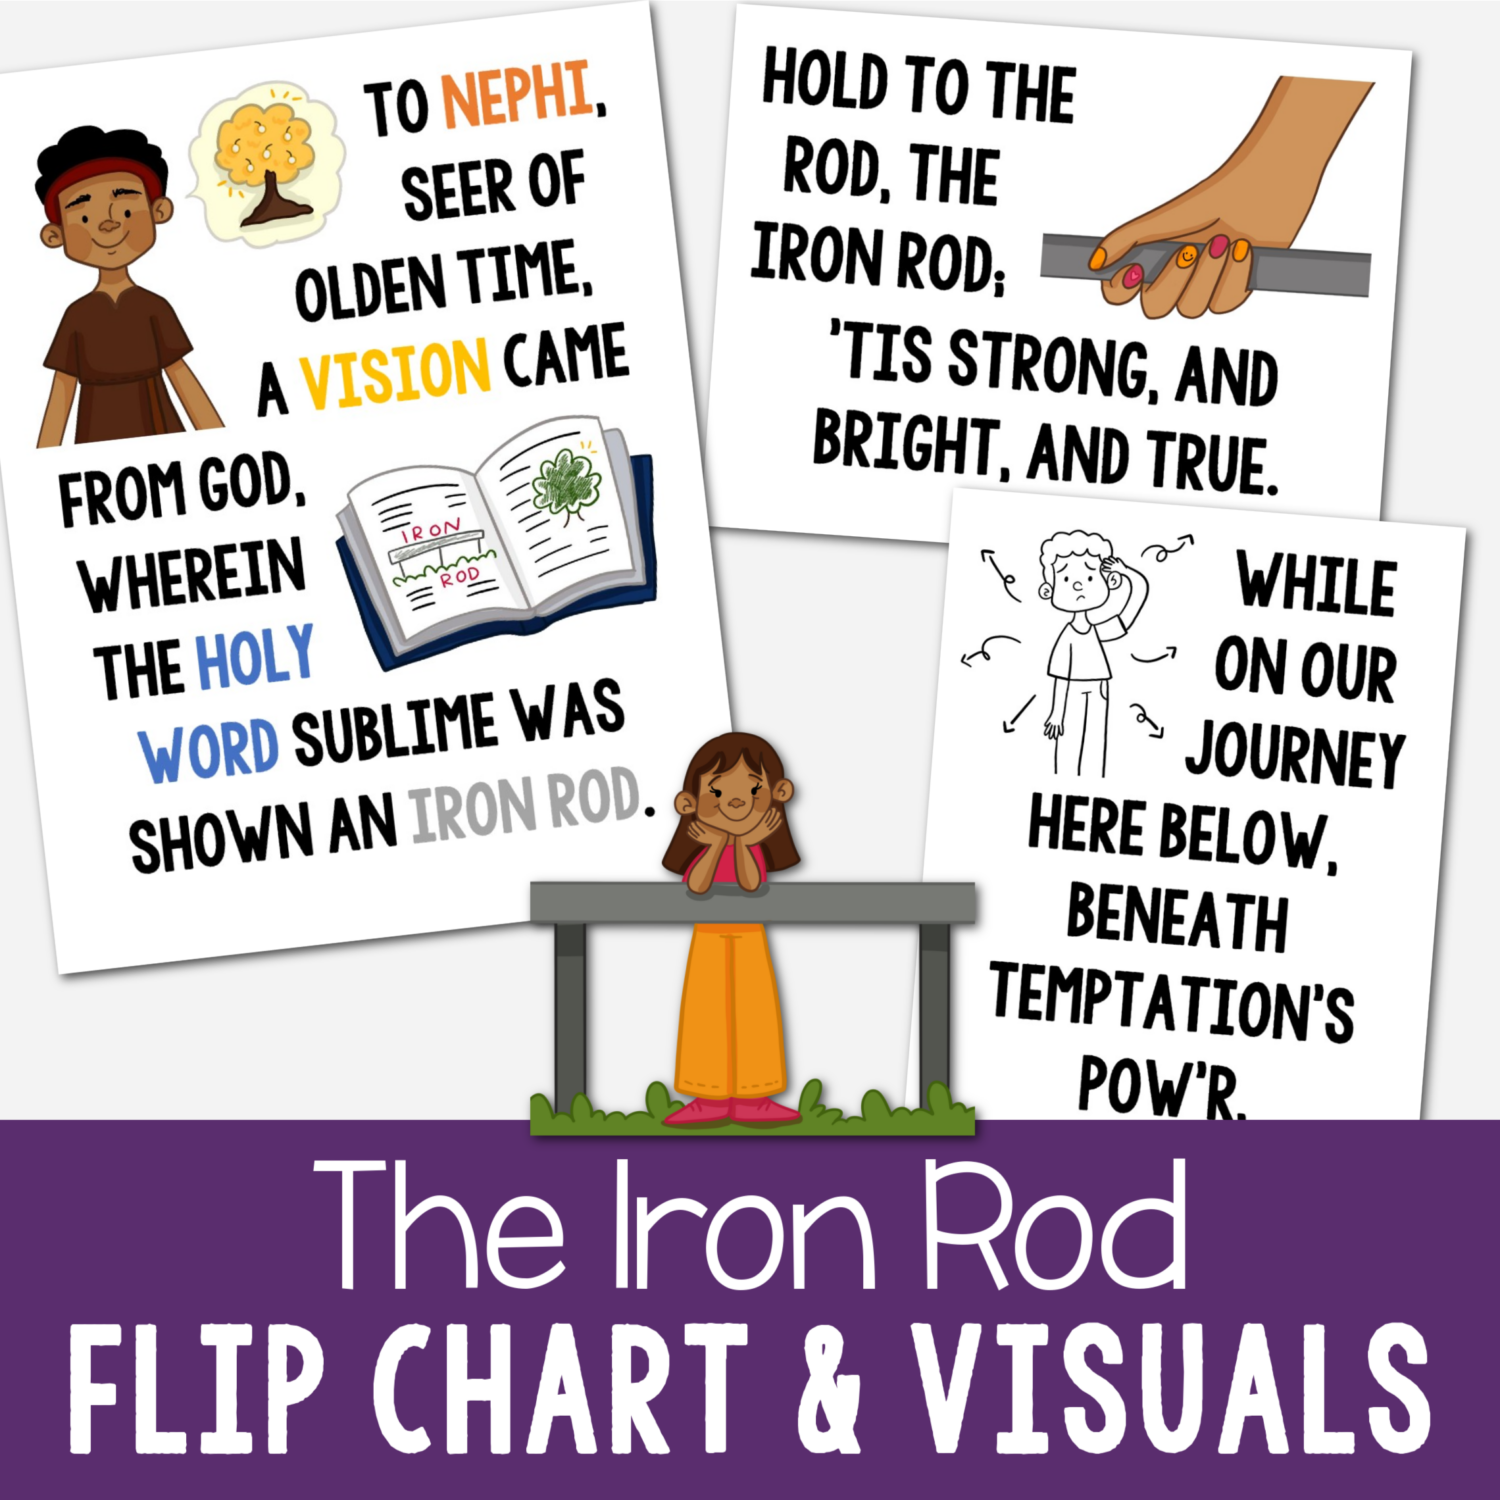 The Iron Rod Flip Chart - Teach this song with these beautiful custom art picture illustrations and visual aids that coordinate with the lyrics. Includes both color and black and white plus a slideshow. A great resource for LDS Primary music leaders or for home Come Follow Me use for families.